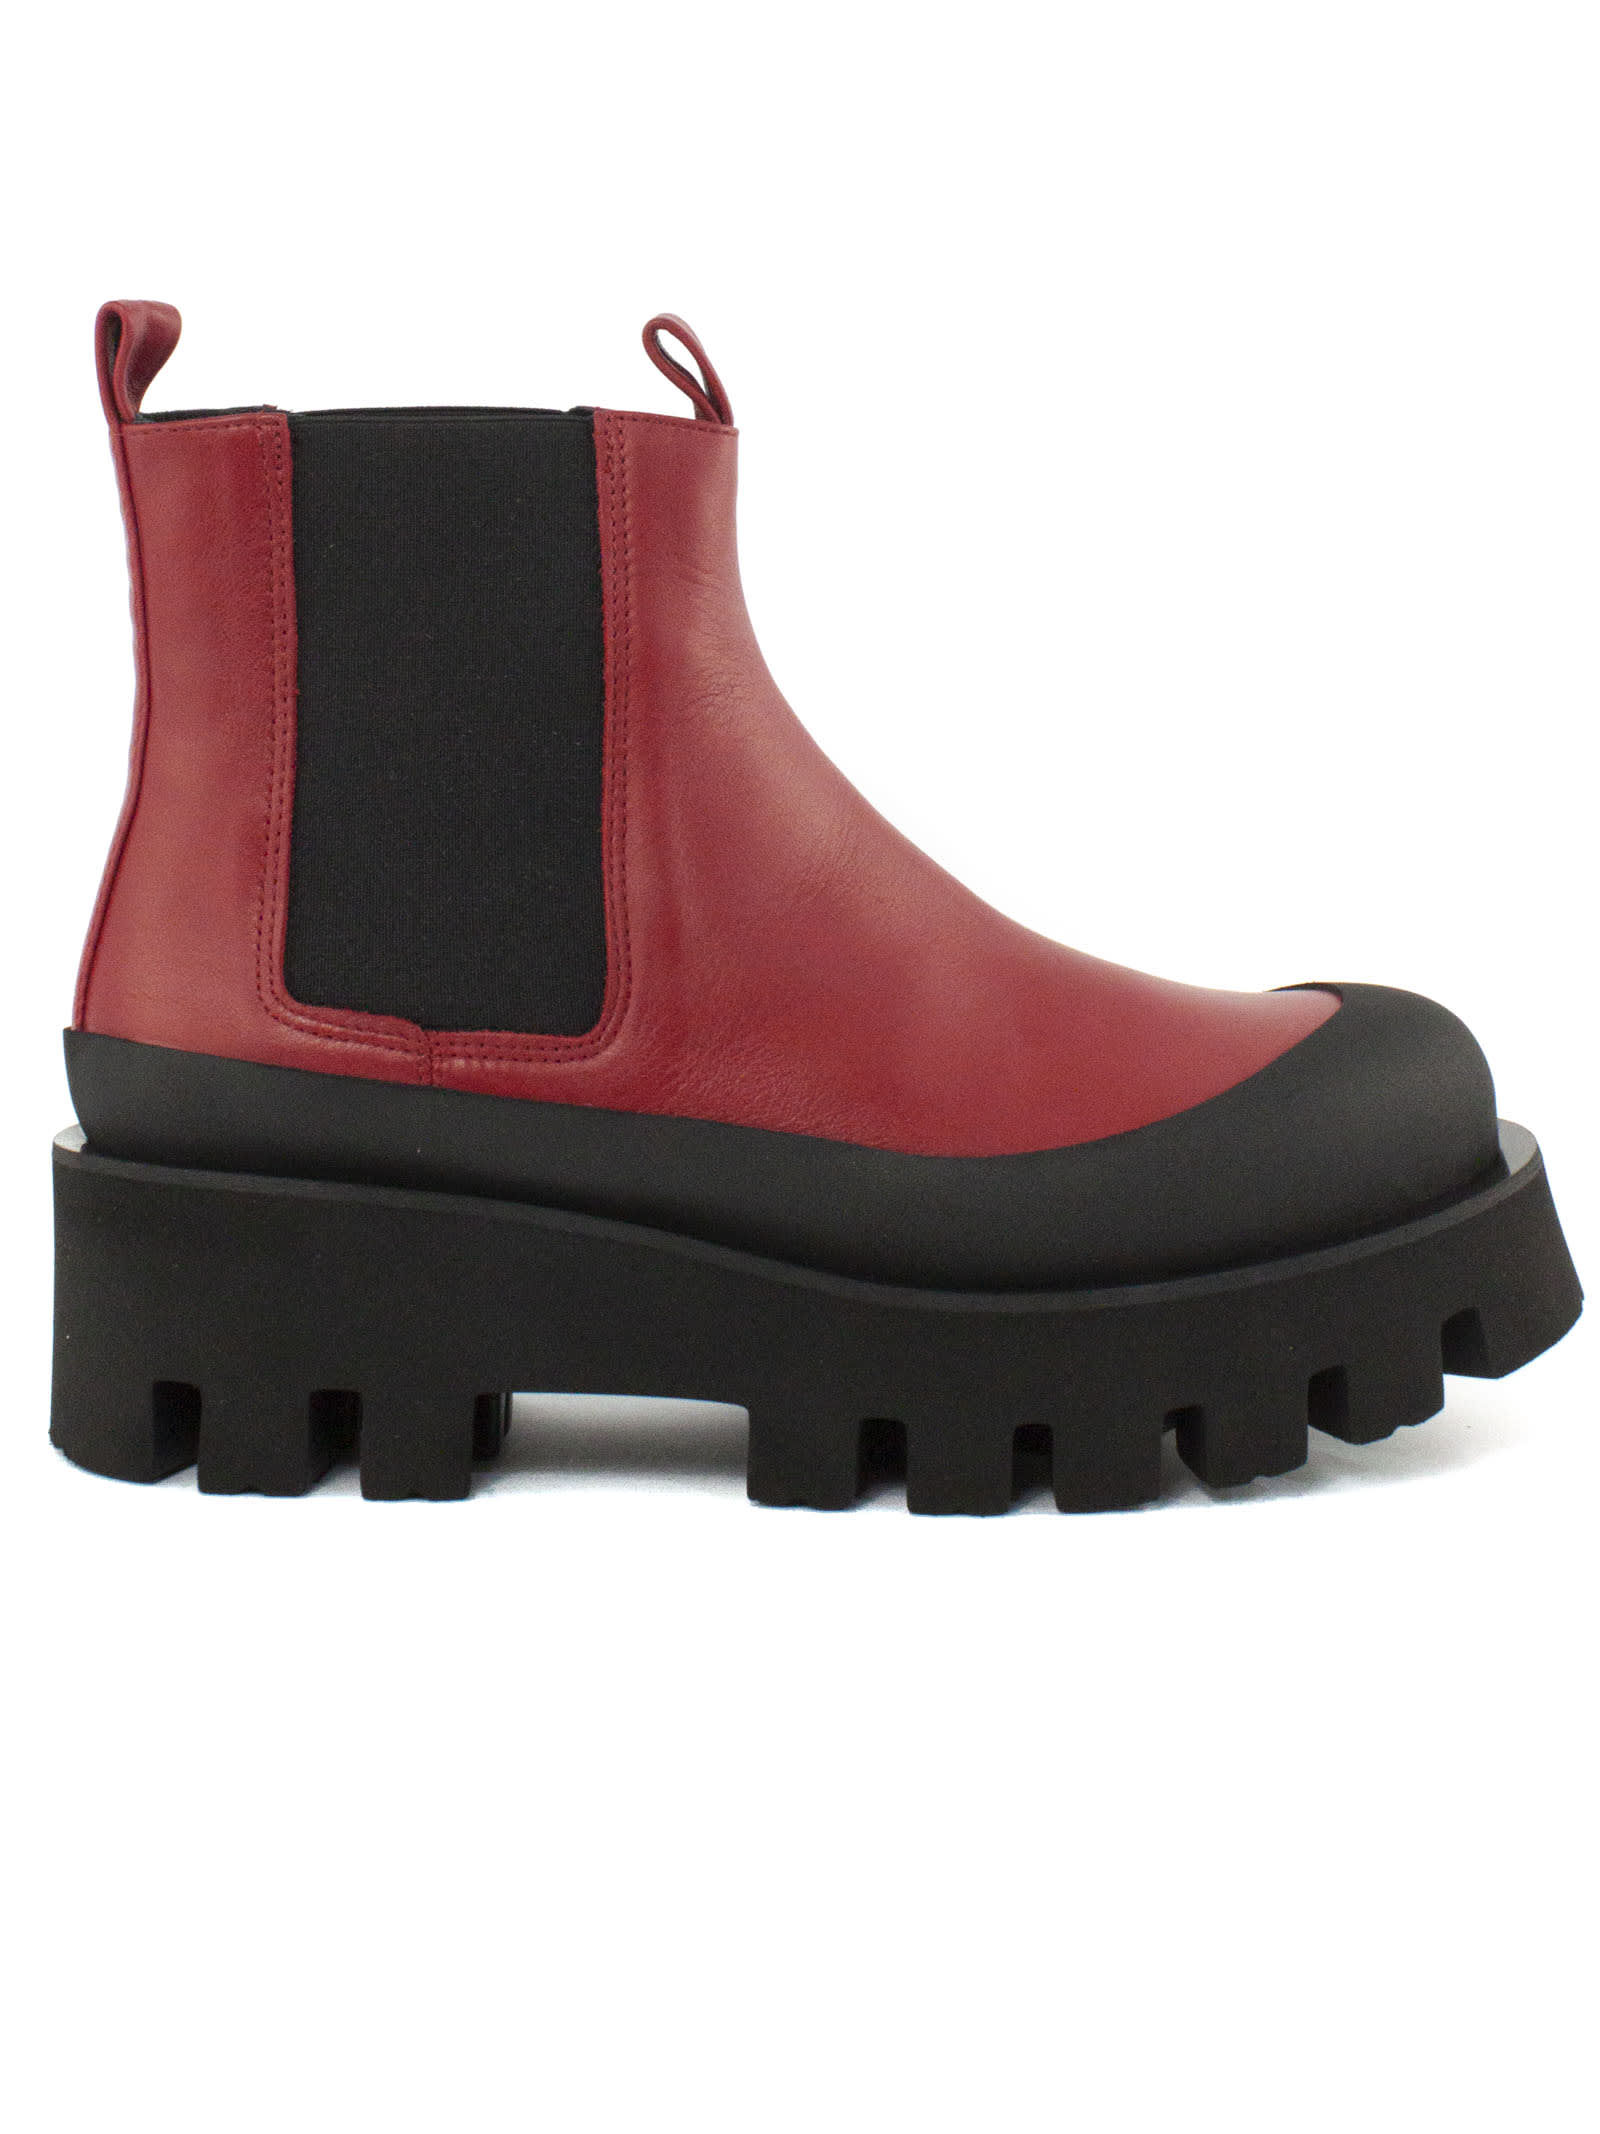 Paloma Barceló Red Leather Celine Chelsea Boots